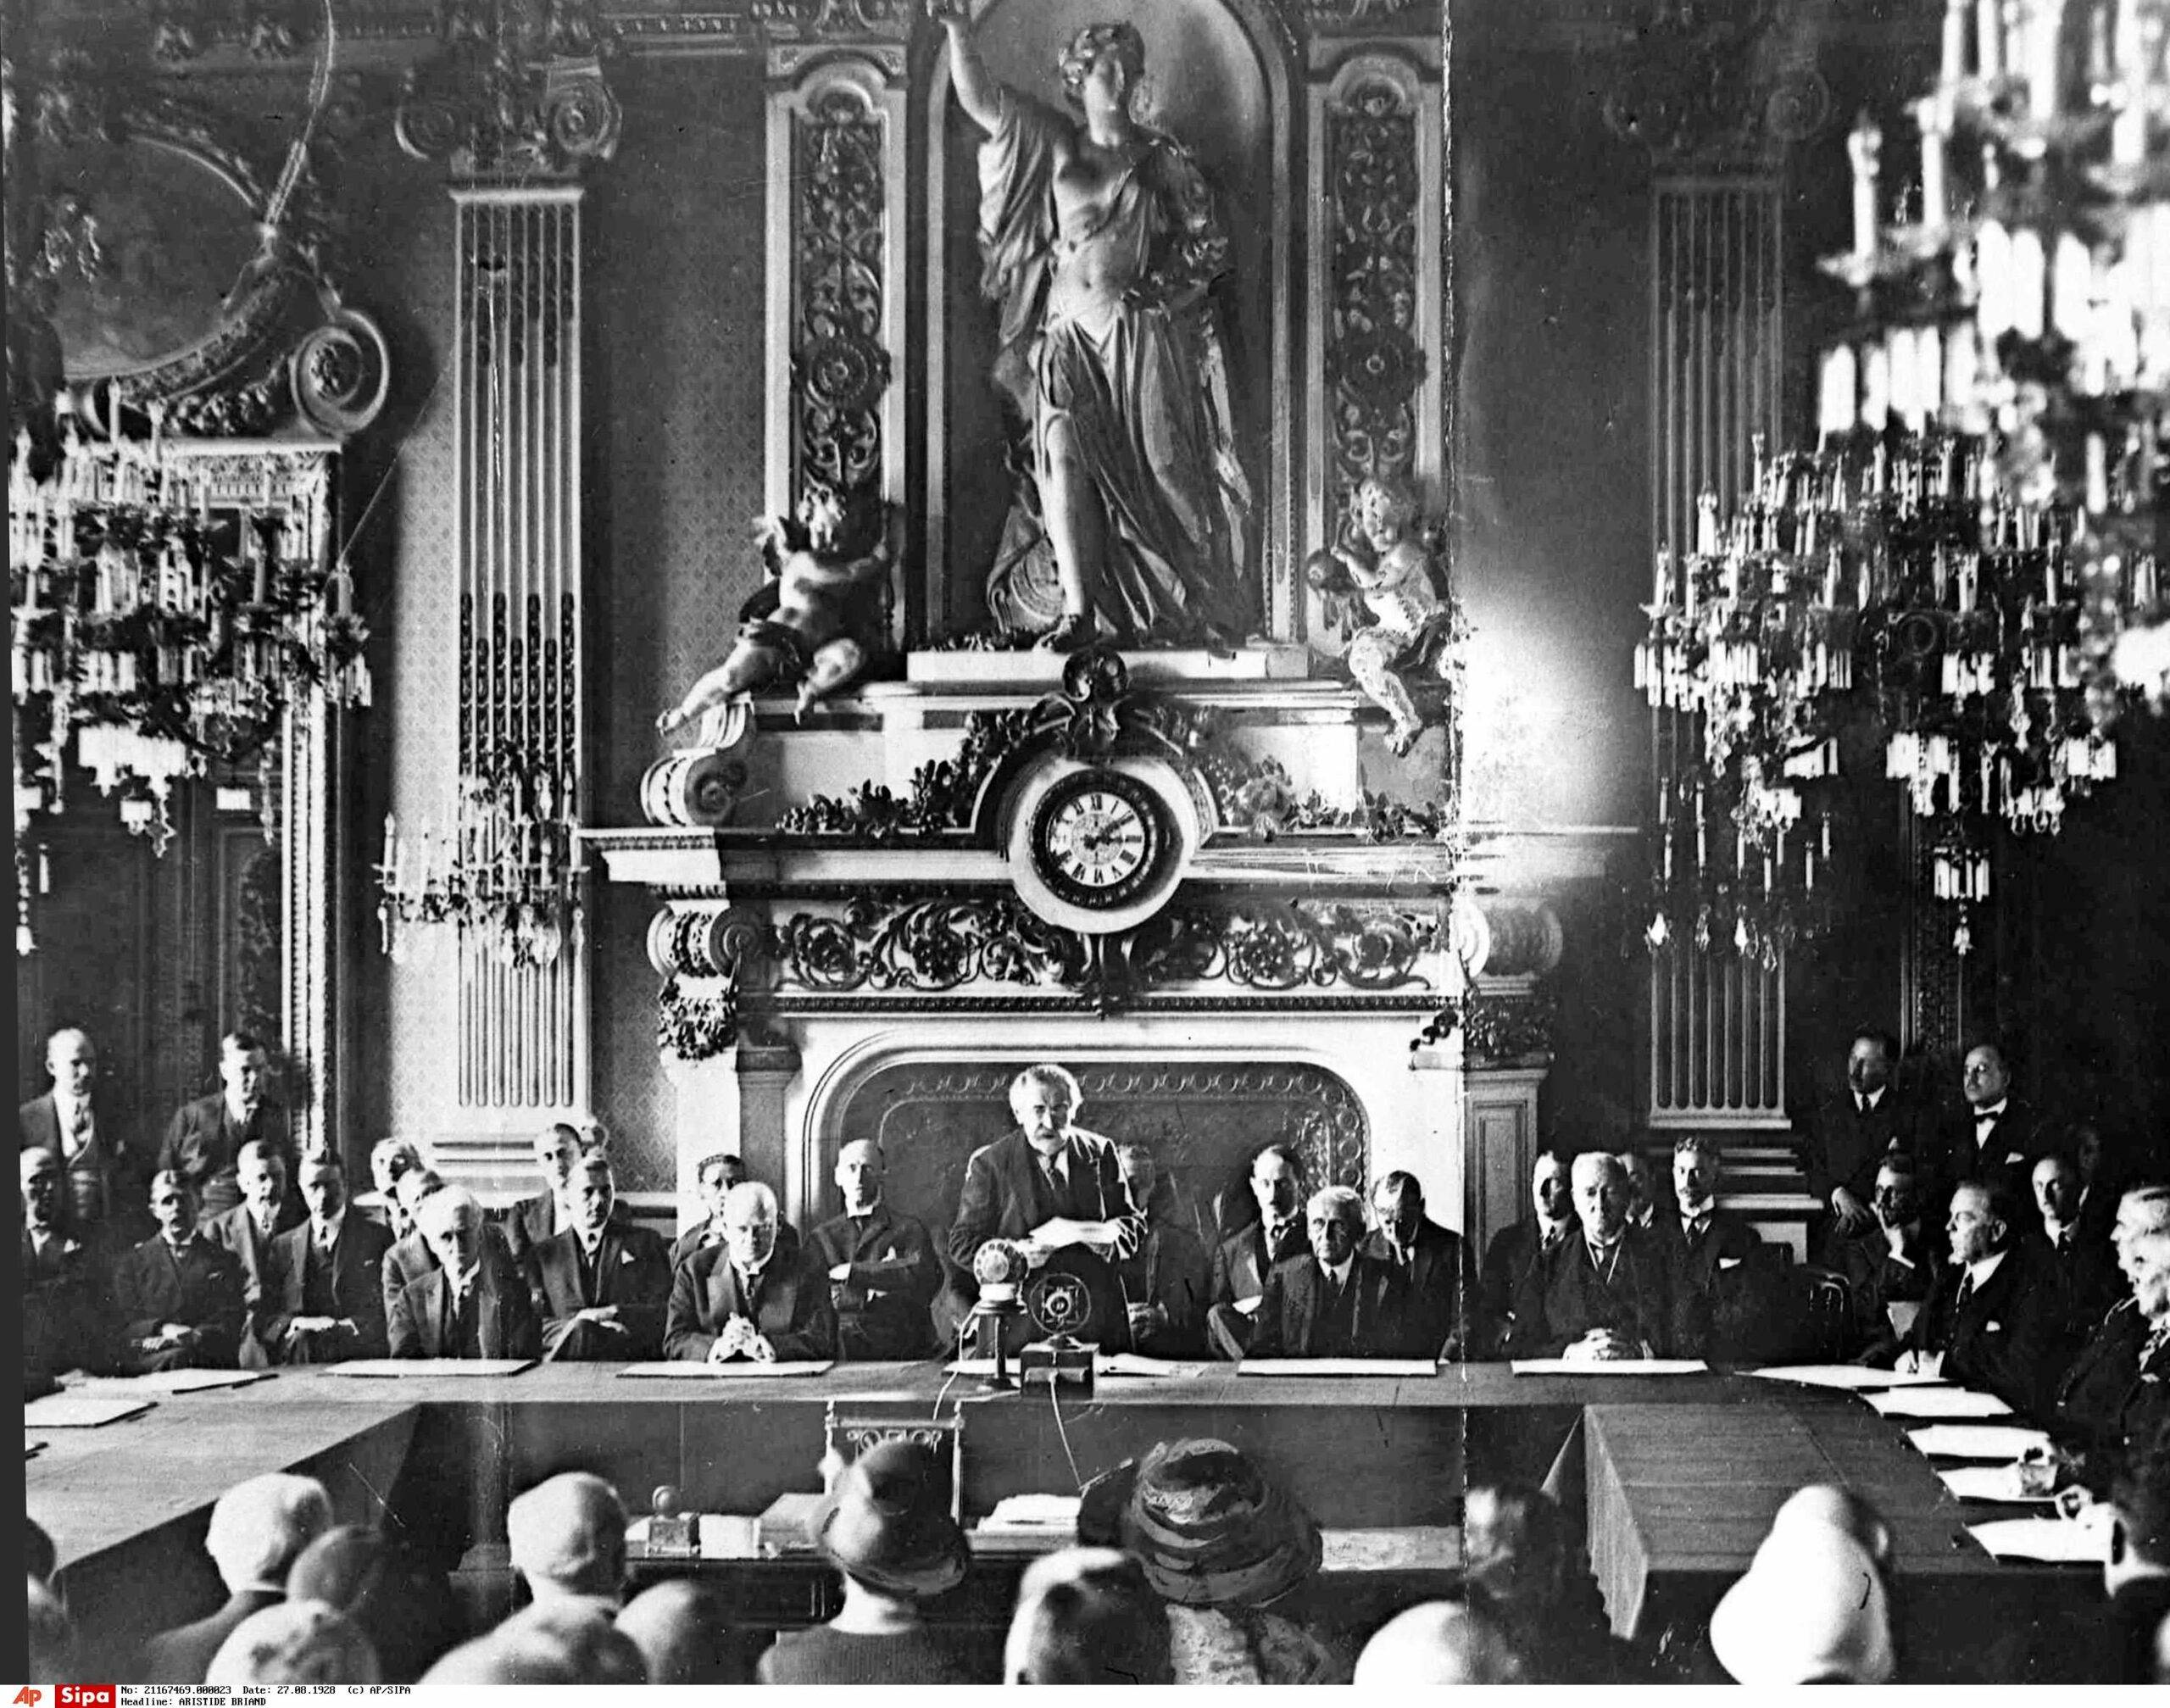 French Foreign Minister Aristide Briand, centre standing, gives his address in the Palais D'Orsay, Paris, Aug. 27, 1928, before the signing of the Pact of Peace The KelloggÐBriand Pact (also called the General Treaty for the Renunciation of War or the World Peace Act) by 15 nations. Seated at table, left to right; Paul Haymans, Belgian Foreign Minister; German Foreign Minister Gustav Stresemann; Briand;  Frank B. Kellogg, American Secretary of State; Lord Ronald Cushendun, Acting Secretary of State for Foreign Affairs for Britain. (AP Photo)/APHSL8218/AP0005/1202071511